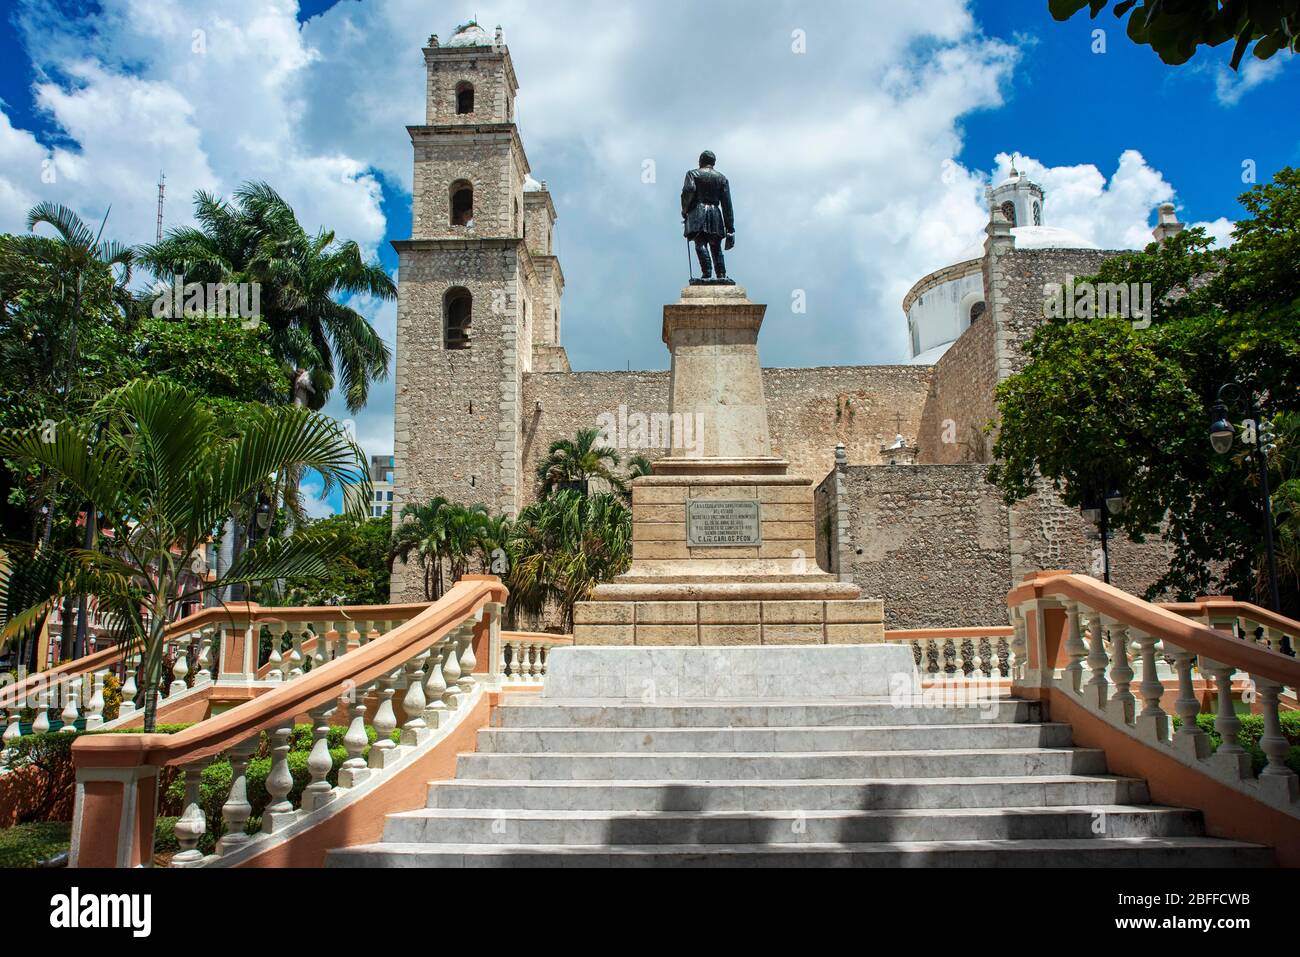 The Parque Hidalgo and statue of Manuel Cepeda Peraza and The San Ildefonso Cathedral in Mérida, the capital and largest city in the Yucatan State and Stock Photo